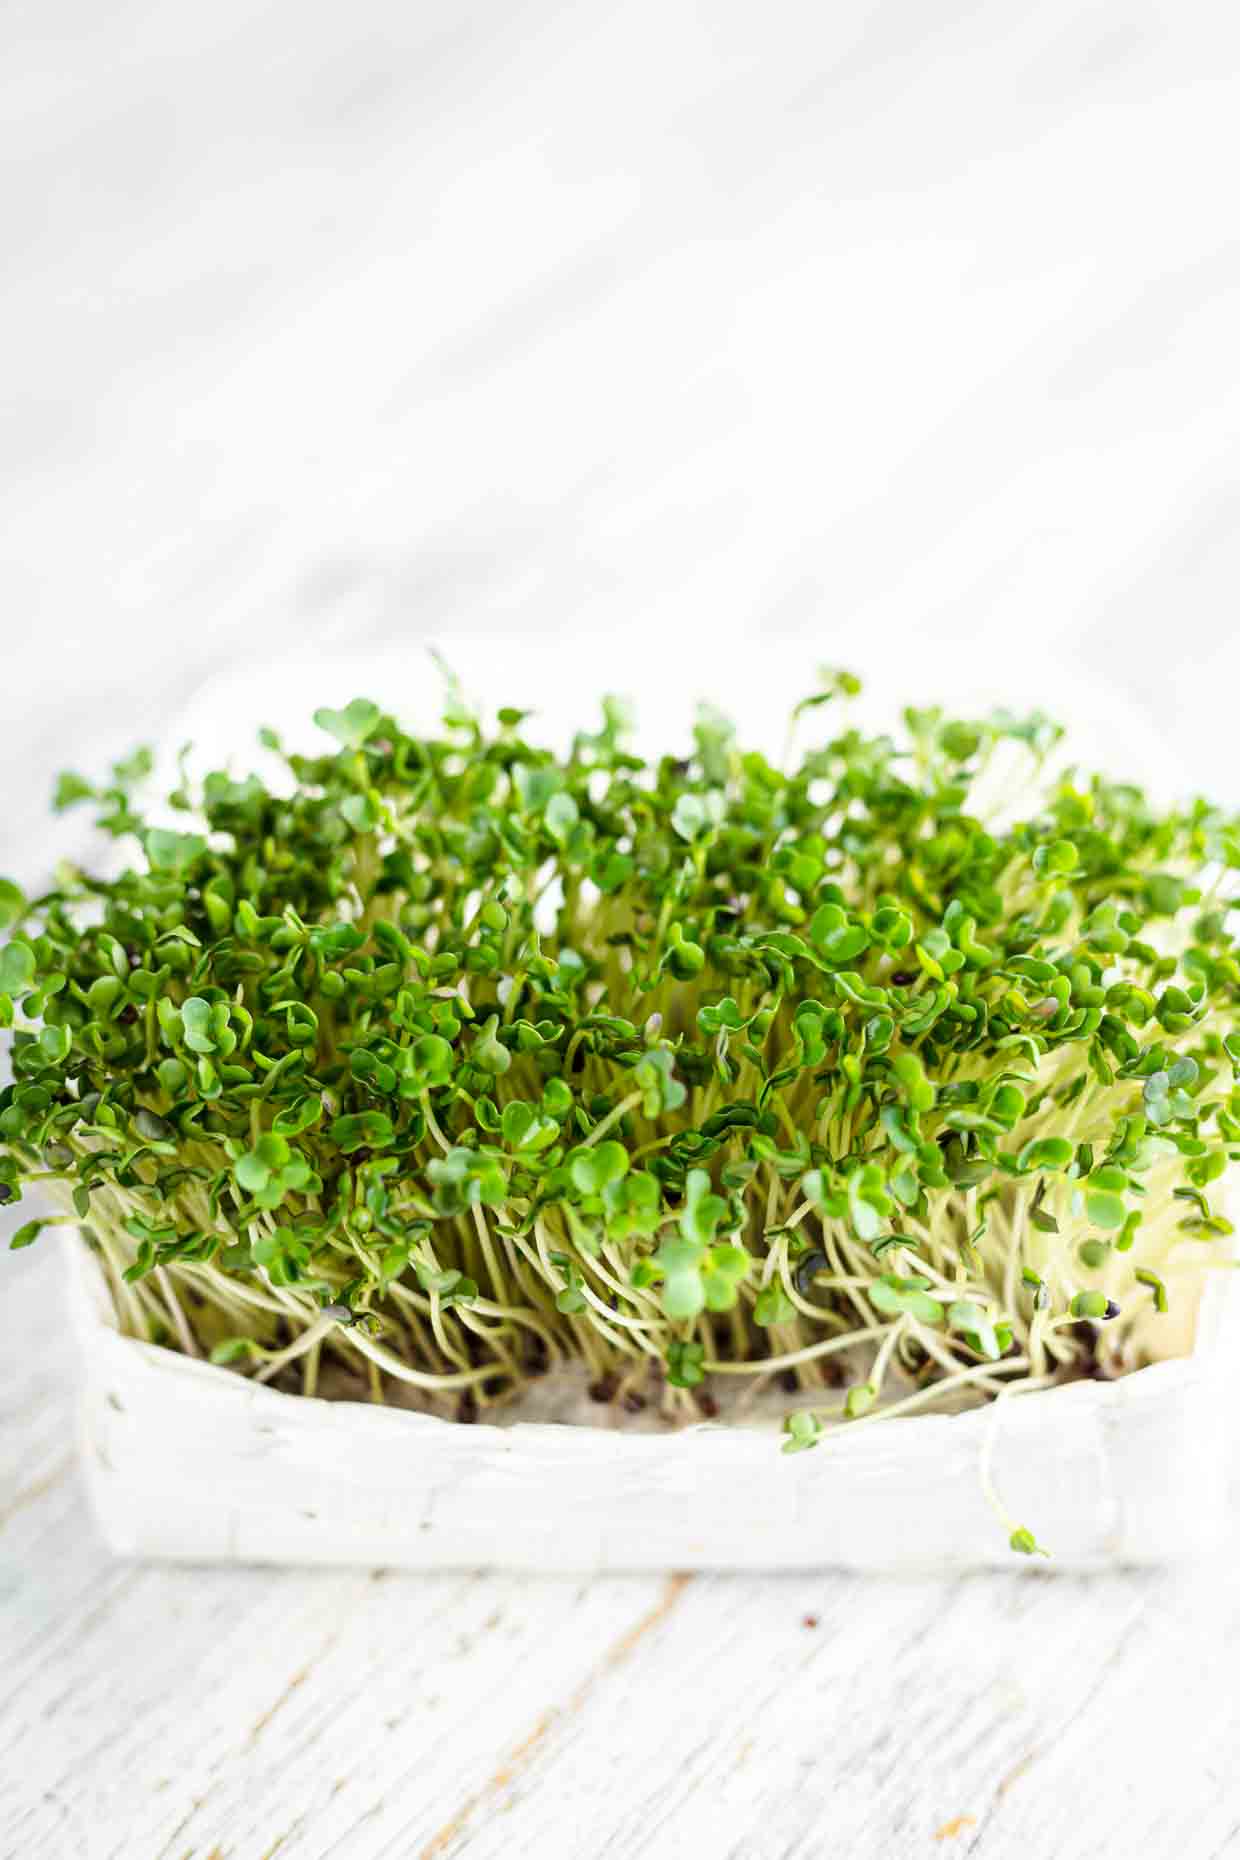 How to grow microgreens ready to harvest.